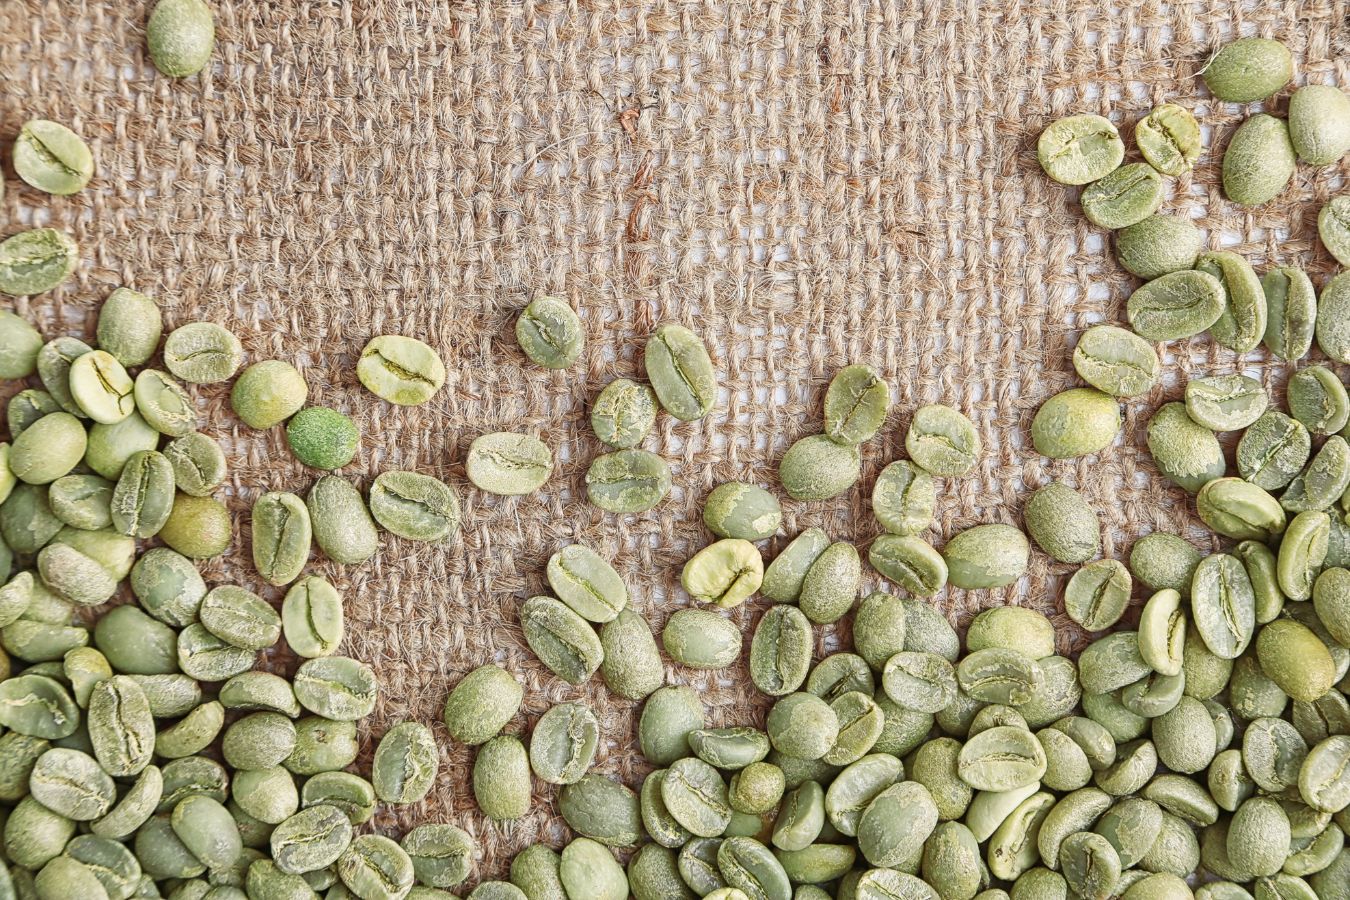 How to Purchase Wholesale Green Coffee Beans